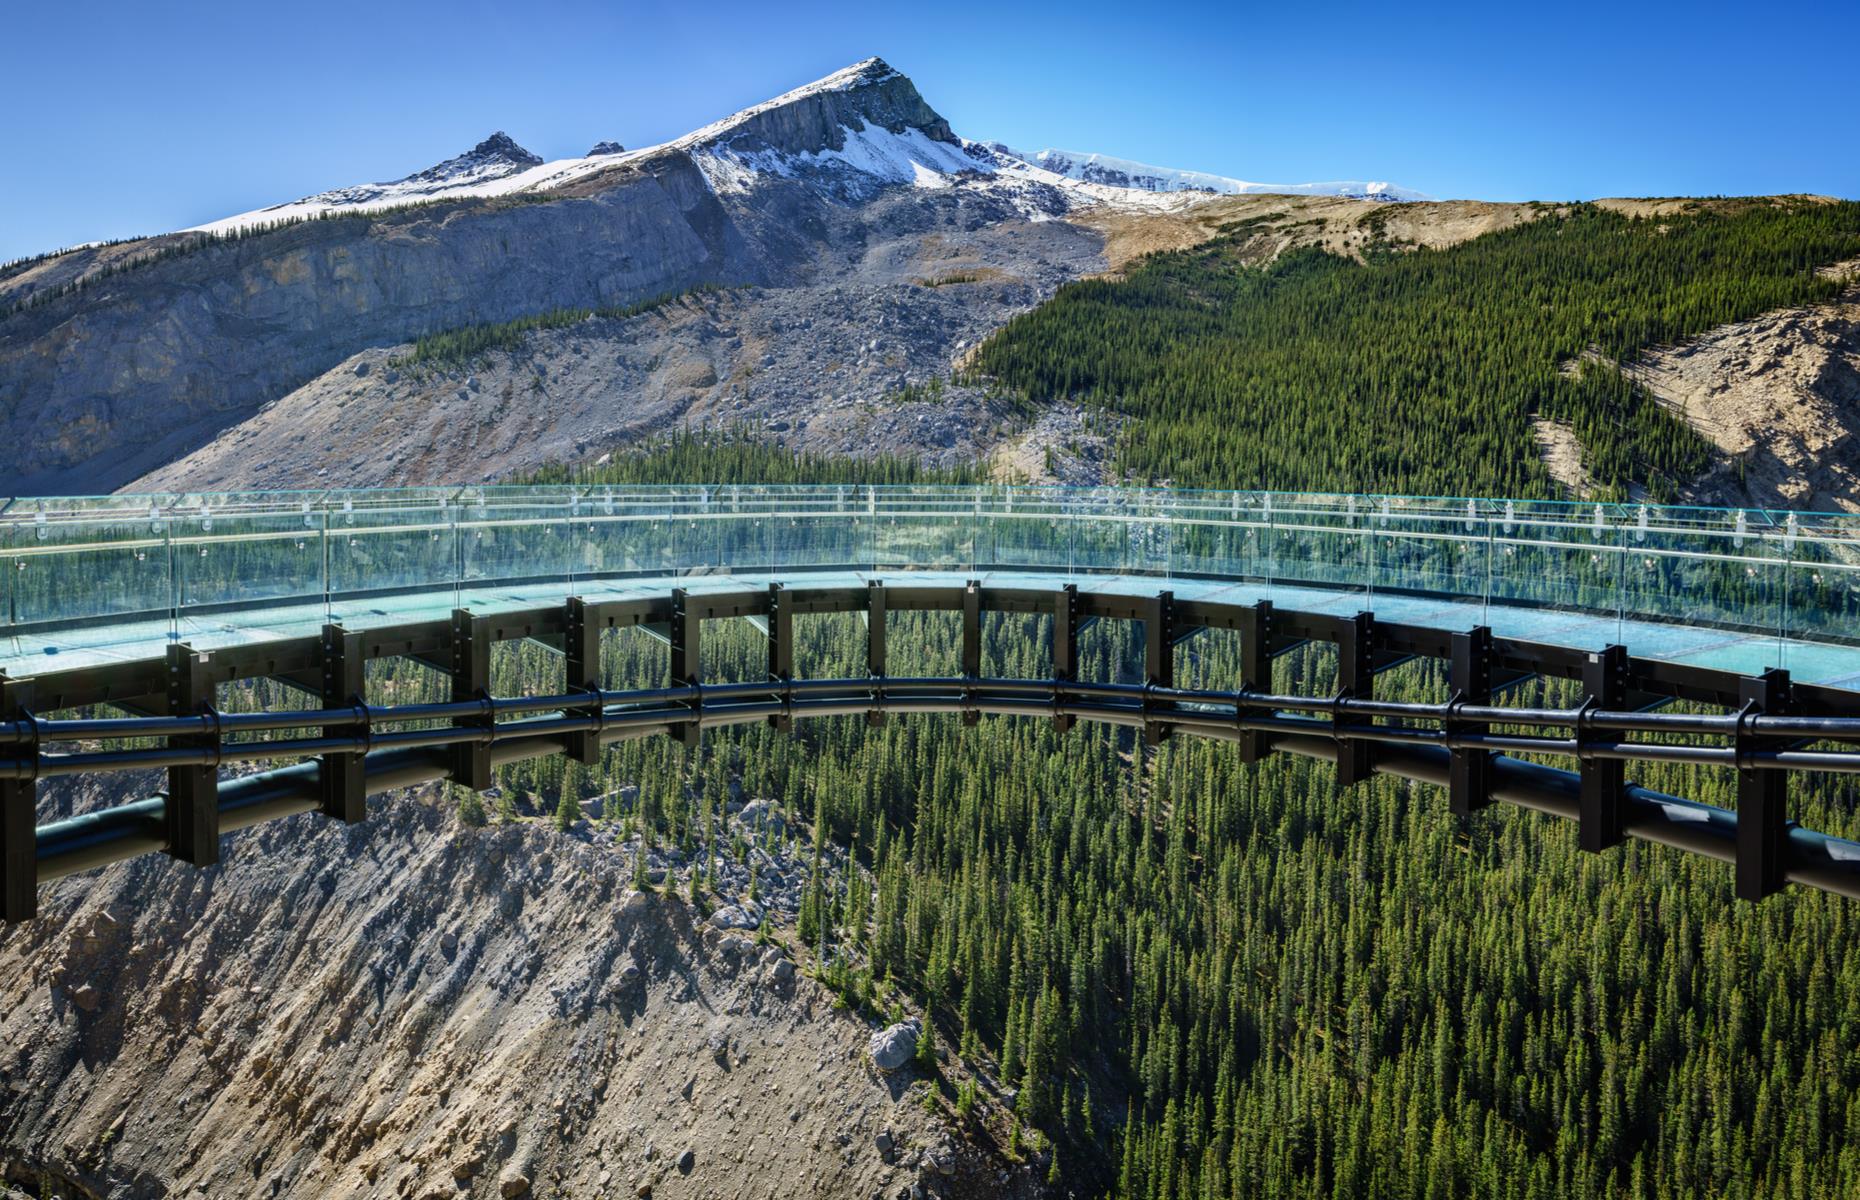 <p>There are many trails and viewpoints to seek out along the way. A popular destination is the Columbia Icefield, the largest icefield in the Rockies. If you have a head for heights, make for the Glacier Skywalk where you can gaze down on the Sunwapta Valley from a glass-floored observation platform that juts out over a 918-foot (280m) drop.</p>